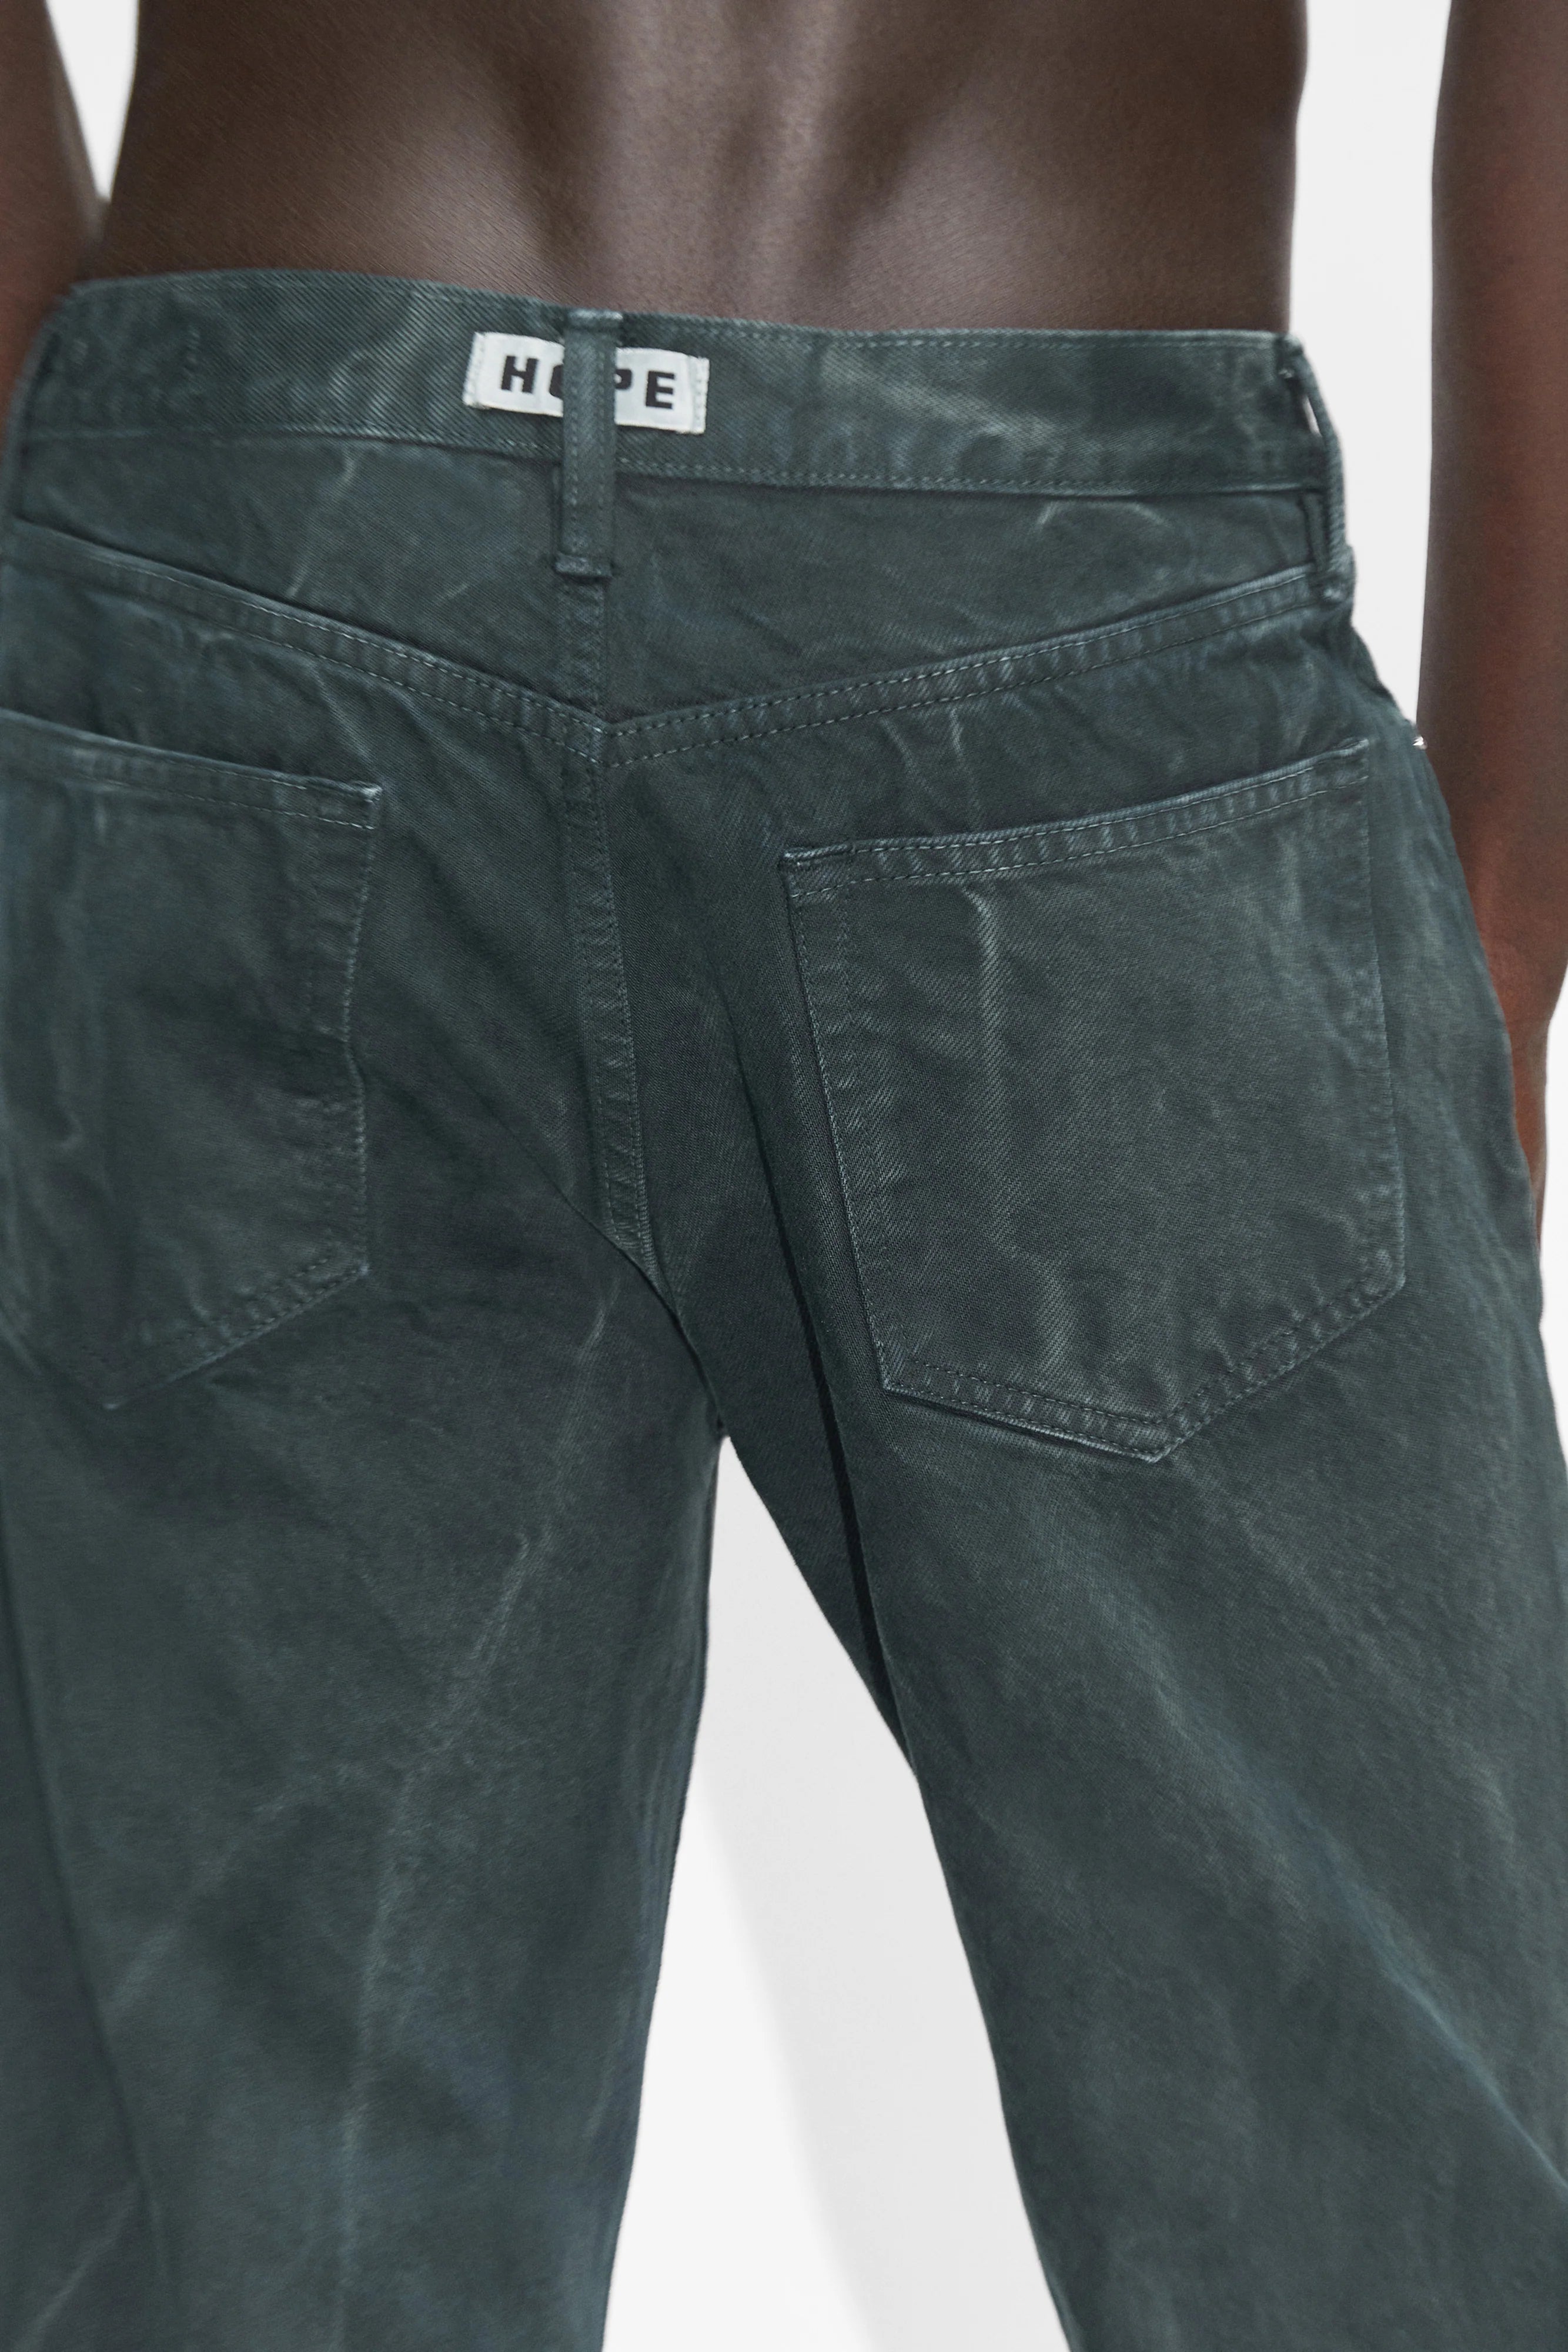 Hope Rush Jeans Green Crackle